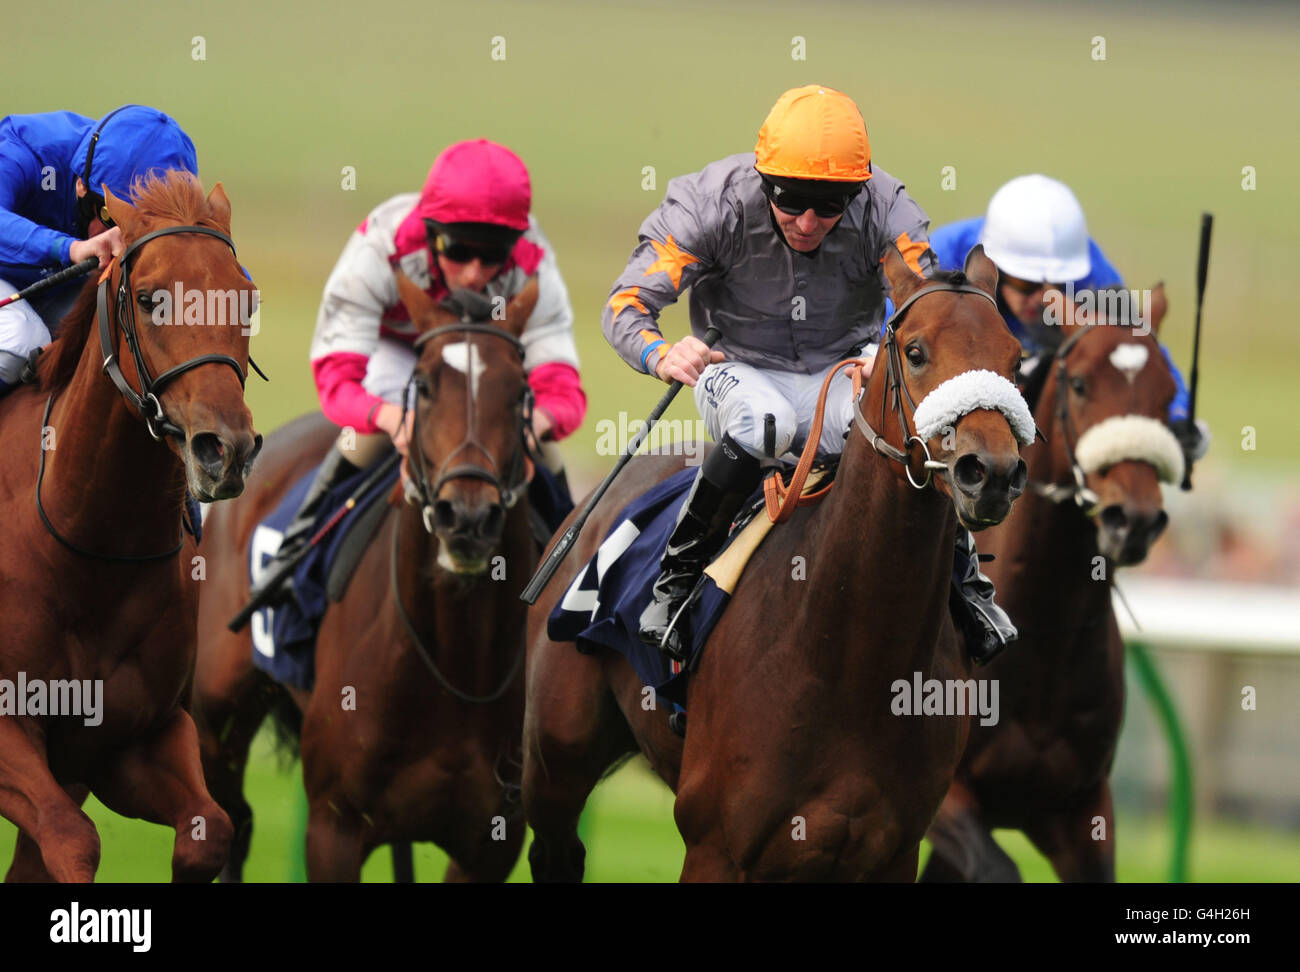 Dandy (2nd right) ridden by Jimmy Fortune comes home to win the E.B.F. Zamindar Maiden Stakes Stock Photo